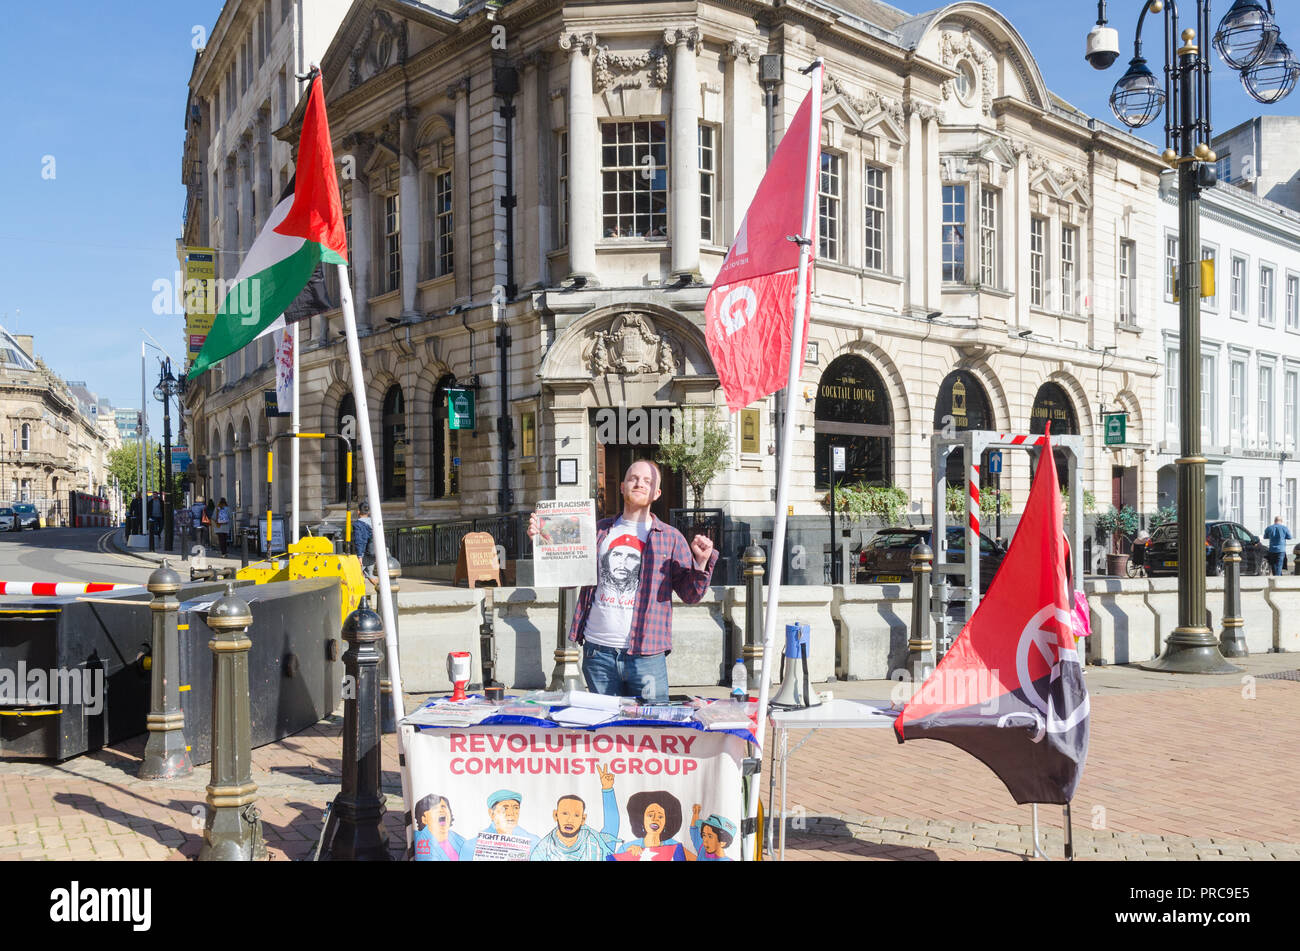 Man wearing Che Guevara t-shirt supporting Revolutionary Communist Group in Victoria Square, Birmingham during the Conservative Party Conference Stock Photo